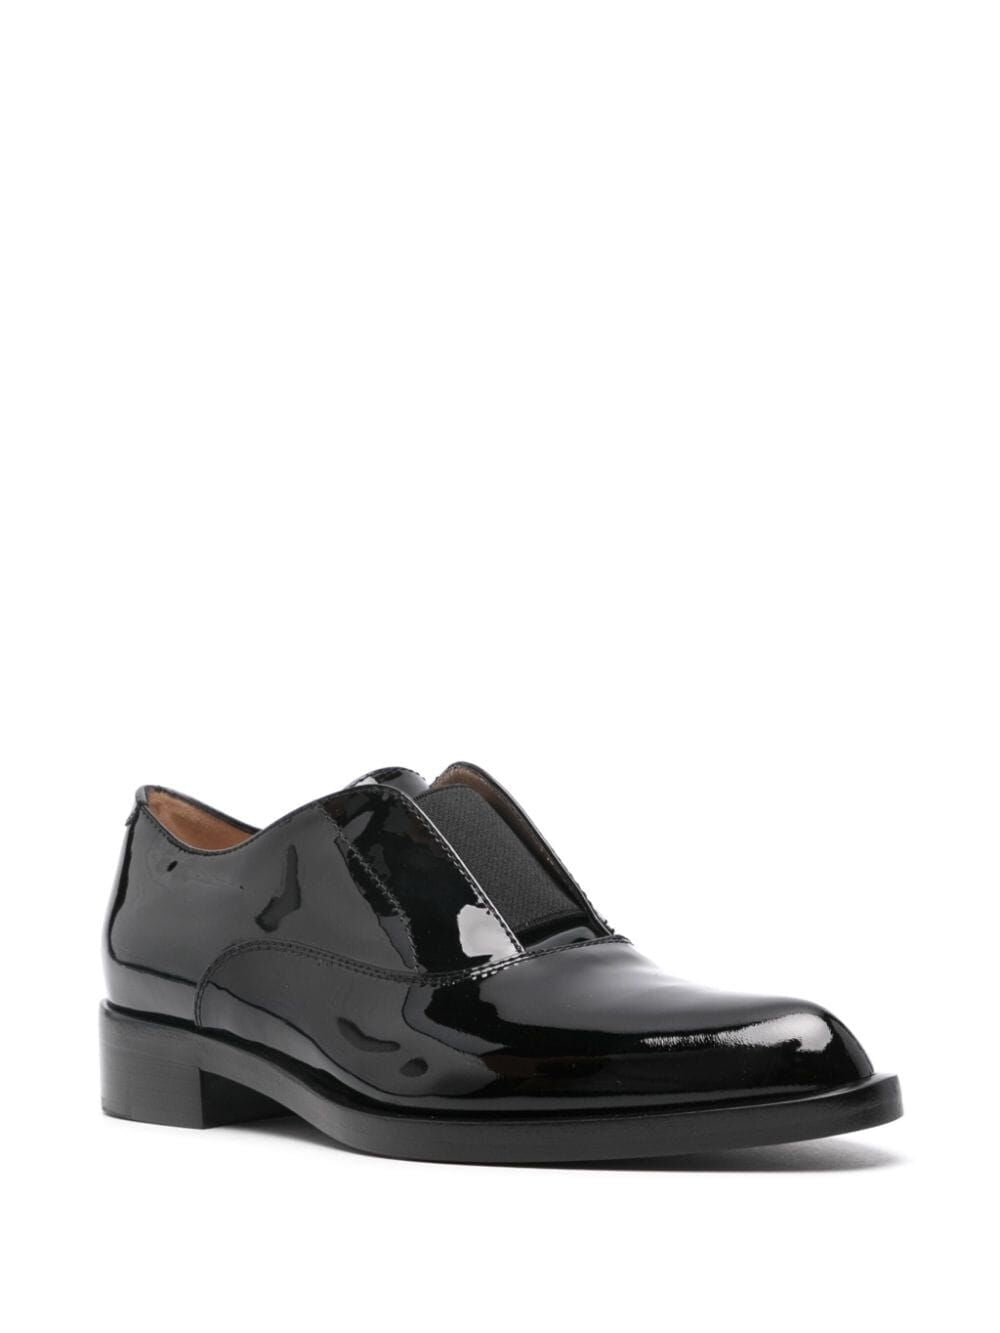 Baxeter Lace-up Patent Leather